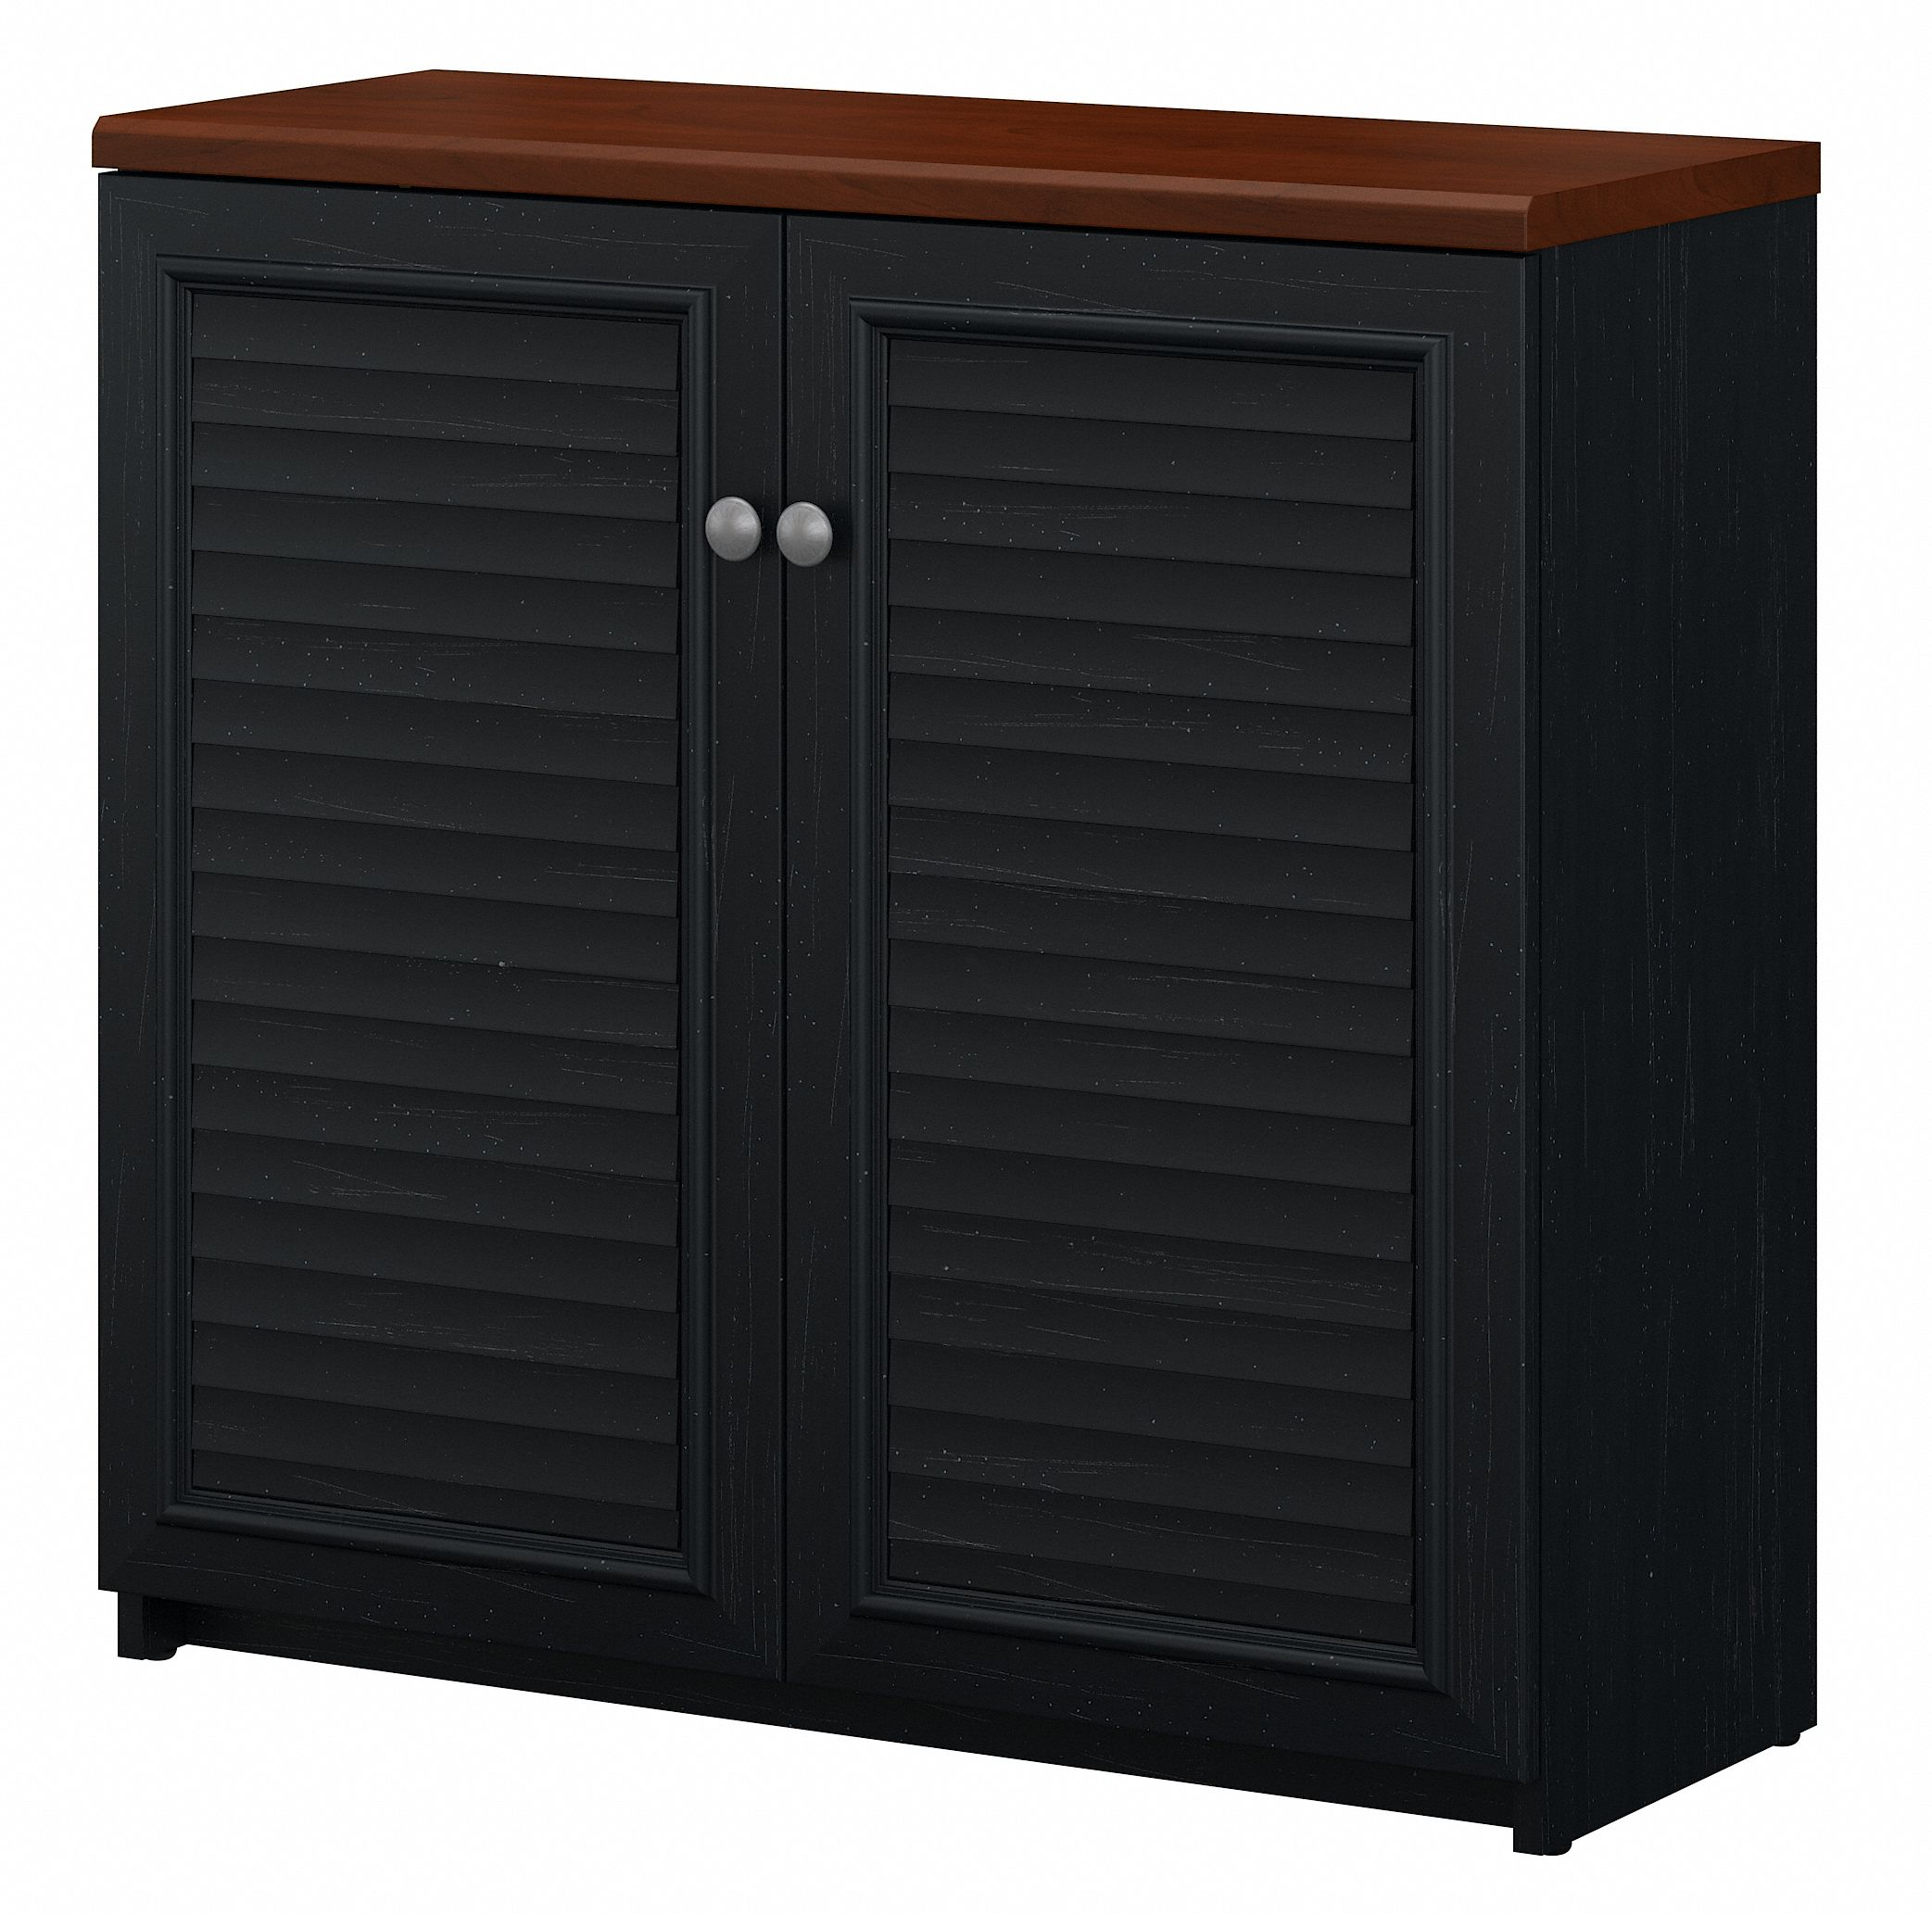 Shop Bush Furniture Fairview Small Storage Cabinet with Doors and Shelves 02 WC53996-03 #color_antique black/hansen cherry